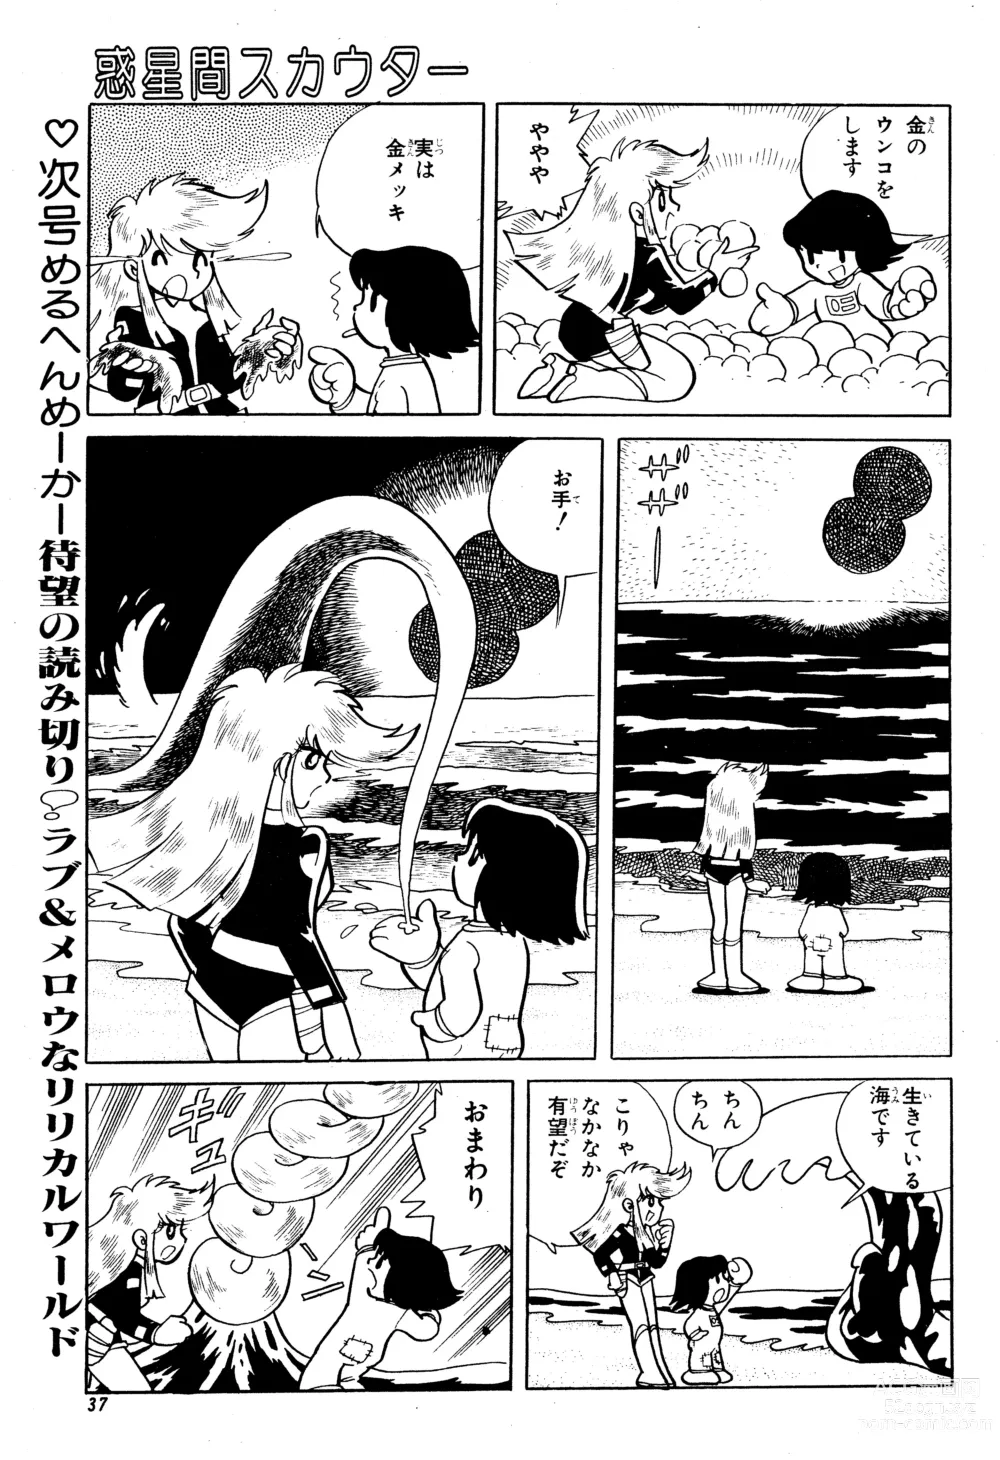 Page 6 of manga Dodemo inner space